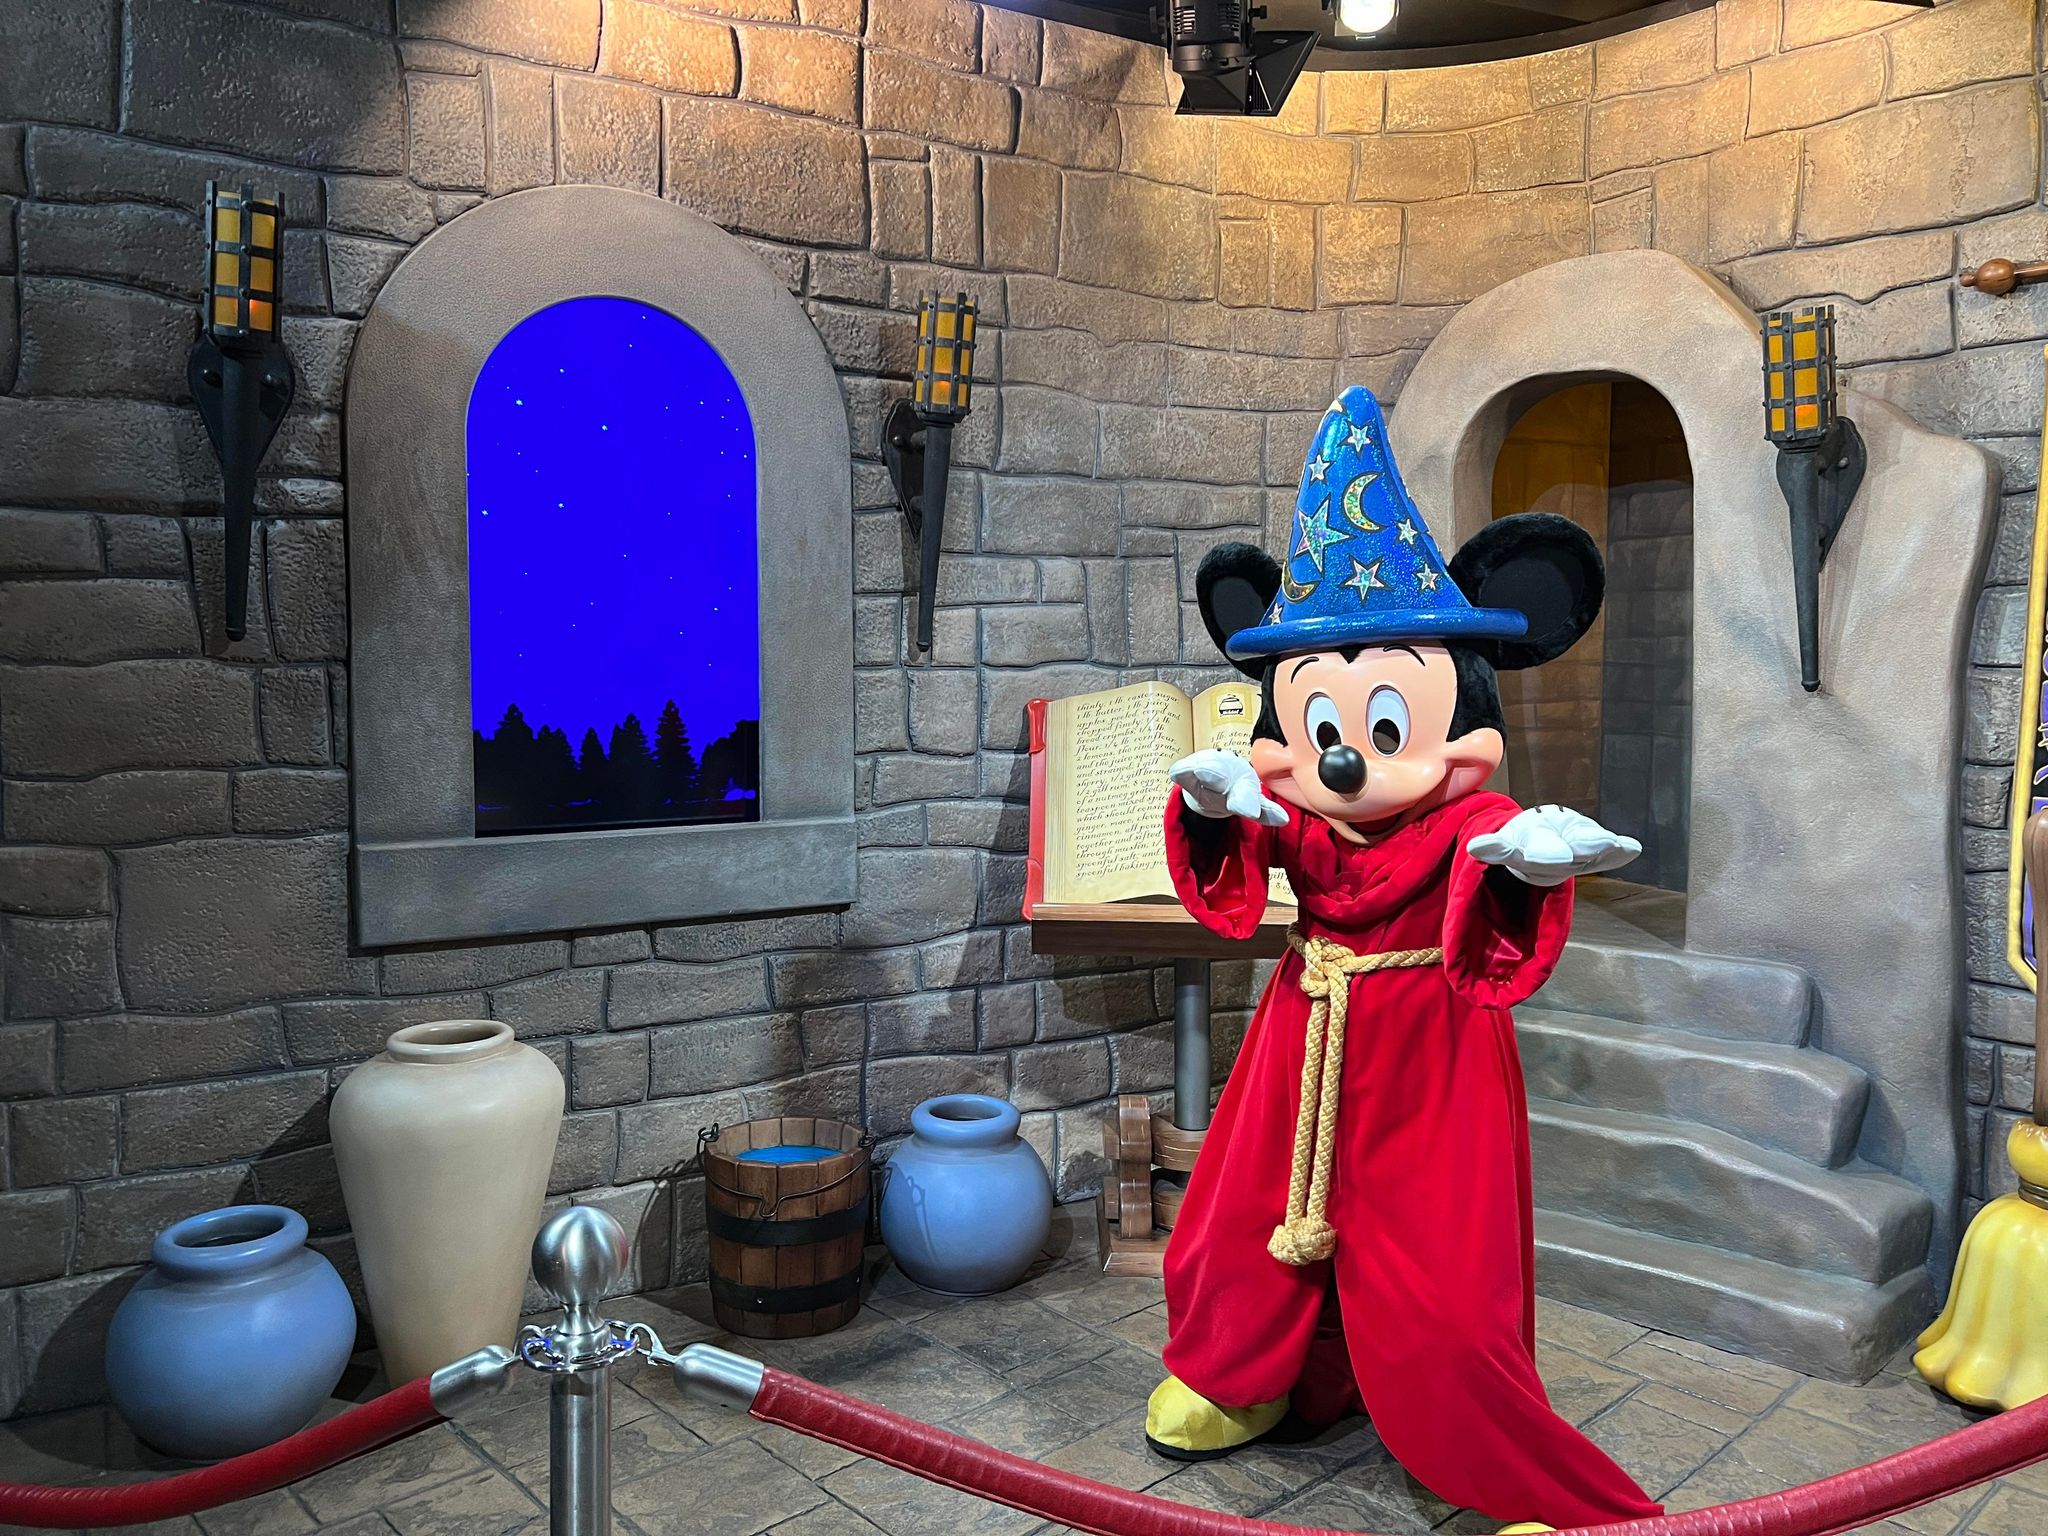 Physically Distanced Sorcerer Mickey Mouse Meet and Greet at Red Carpet  Dreams in Hollywood Studios